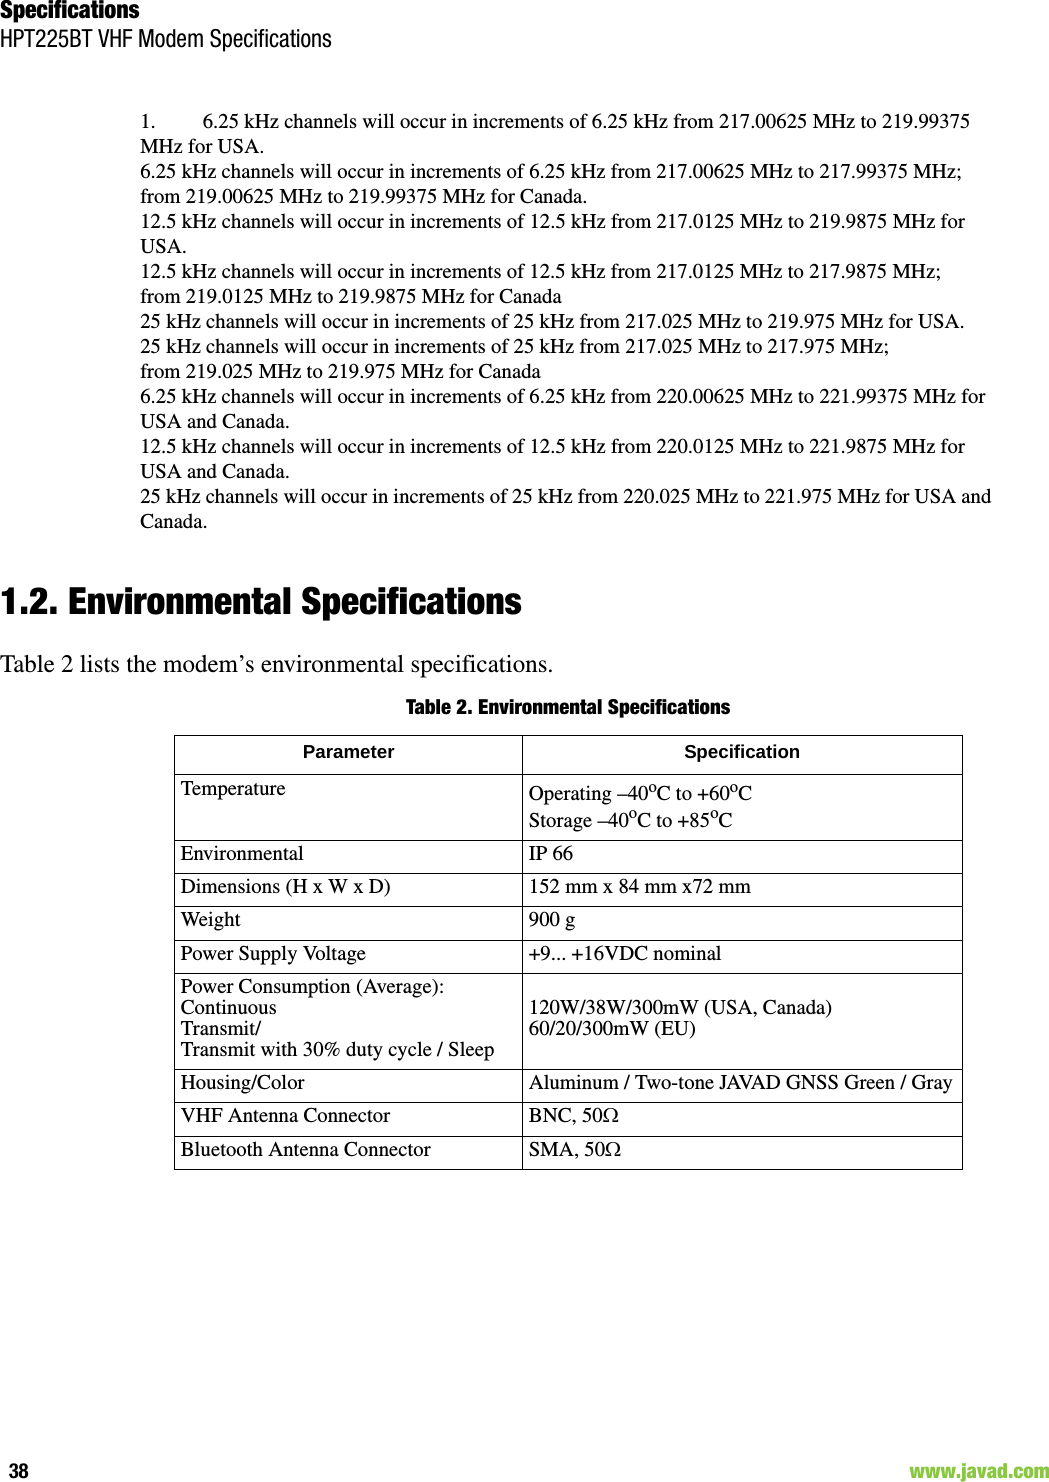 SpecificationsHPT225BT VHF Modem Specifications38                                                                                                                     www.javad.com1.2. Environmental SpecificationsTable 2 lists the modem’s environmental specifications.Table 2. Environmental Specifications1. 6.25 kHz channels will occur in increments of 6.25 kHz from 217.00625 MHz to 219.99375 MHz for USA.6.25 kHz channels will occur in increments of 6.25 kHz from 217.00625 MHz to 217.99375 MHz; from 219.00625 MHz to 219.99375 MHz for Canada.12.5 kHz channels will occur in increments of 12.5 kHz from 217.0125 MHz to 219.9875 MHz for USA.12.5 kHz channels will occur in increments of 12.5 kHz from 217.0125 MHz to 217.9875 MHz; from 219.0125 MHz to 219.9875 MHz for Canada25 kHz channels will occur in increments of 25 kHz from 217.025 MHz to 219.975 MHz for USA.25 kHz channels will occur in increments of 25 kHz from 217.025 MHz to 217.975 MHz;from 219.025 MHz to 219.975 MHz for Canada6.25 kHz channels will occur in increments of 6.25 kHz from 220.00625 MHz to 221.99375 MHz for USA and Canada.12.5 kHz channels will occur in increments of 12.5 kHz from 220.0125 MHz to 221.9875 MHz for USA and Canada.25 kHz channels will occur in increments of 25 kHz from 220.025 MHz to 221.975 MHz for USA and Canada.Parameter SpecificationTemperature Operating –40oC to +60oCStorage –40oC to +85oCEnvironmental IP 66Dimensions (H x W x D) 152 mm x 84 mm x72 mmWeight 900 gPower Supply Voltage +9... +16VDC nominalPower Consumption (Average): ContinuousTransmit/Transmit with 30% duty cycle / Sleep120W/38W/300mW (USA, Canada)60/20/300mW (EU)Housing/Color Aluminum / Two-tone JAVAD GNSS Green / GrayVHF Antenna Connector BNC, 50Bluetooth Antenna Connector SMA, 50